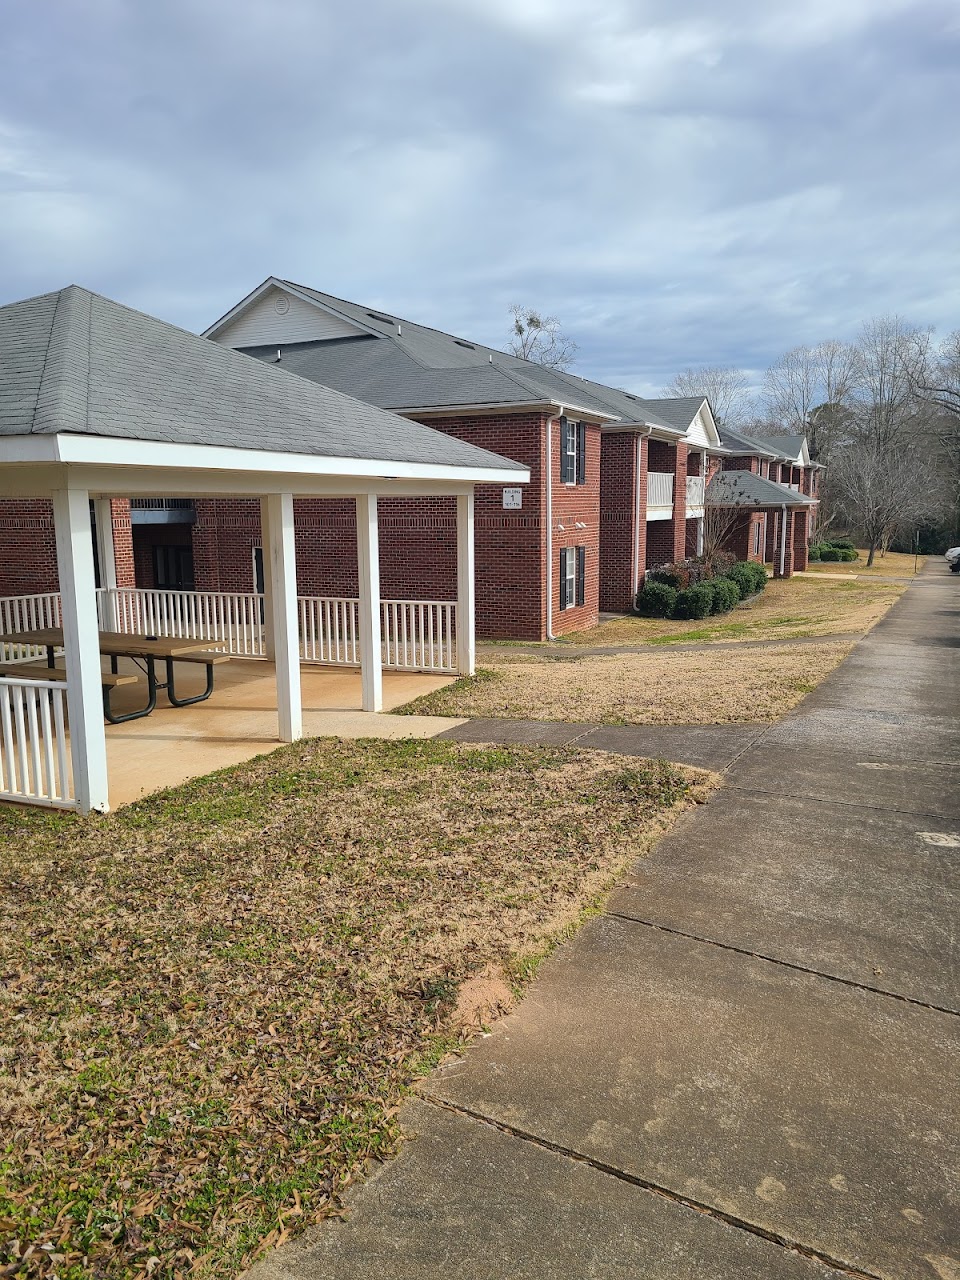 Photo of MAYBERRY PARK. Affordable housing located at 169 E CASS ST DADEVILLE, AL 36853